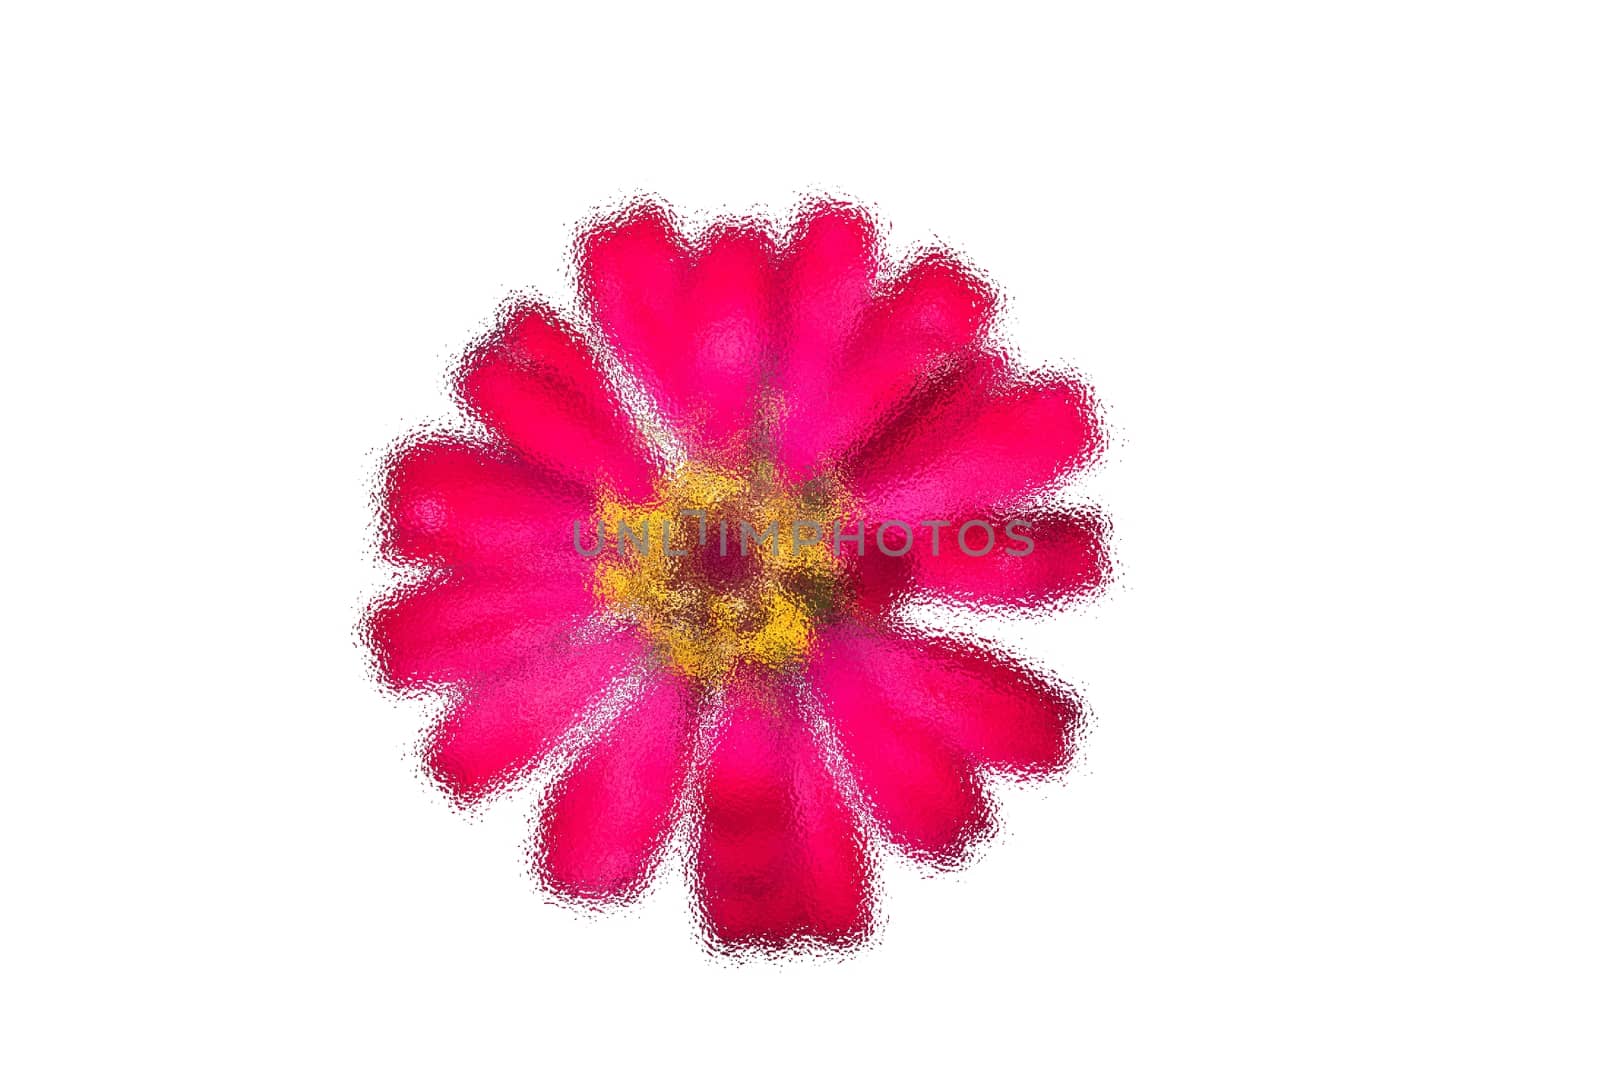 Abstract frosted glass image on Beautiful Pink flower of zinnia isolated on white background. by peerapixs